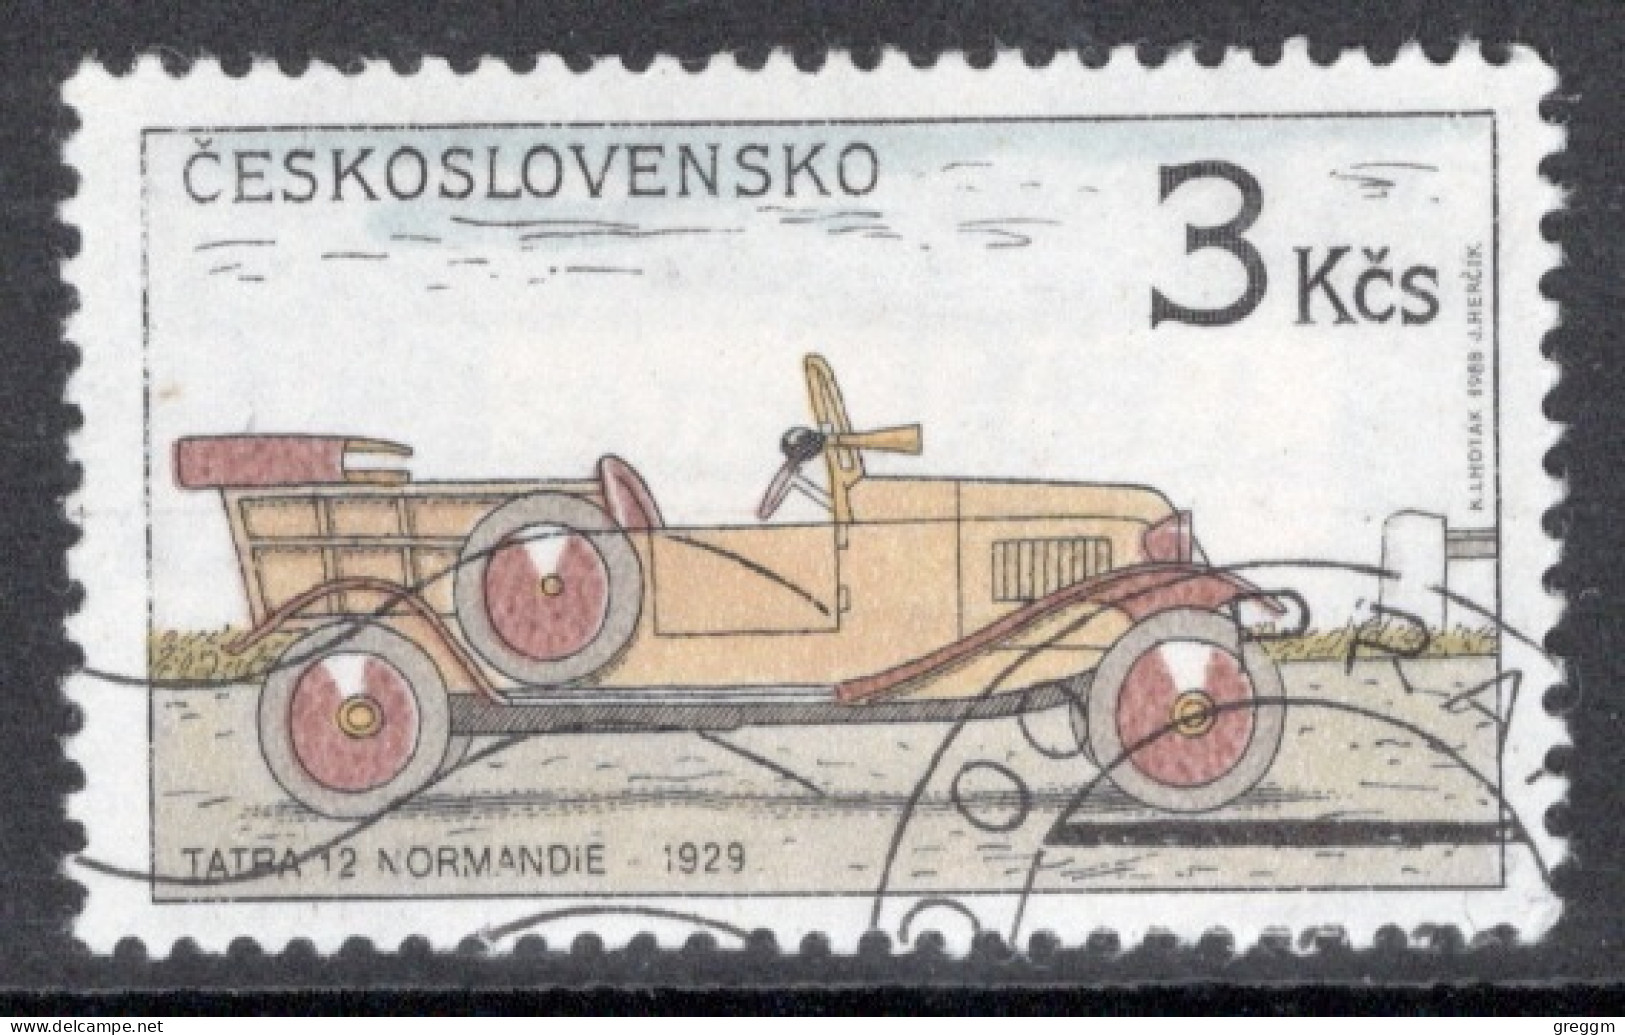 Czechoslovakia 1988 Single Stamp To Celebrate Historic Motor Cars In Fine Used - Used Stamps